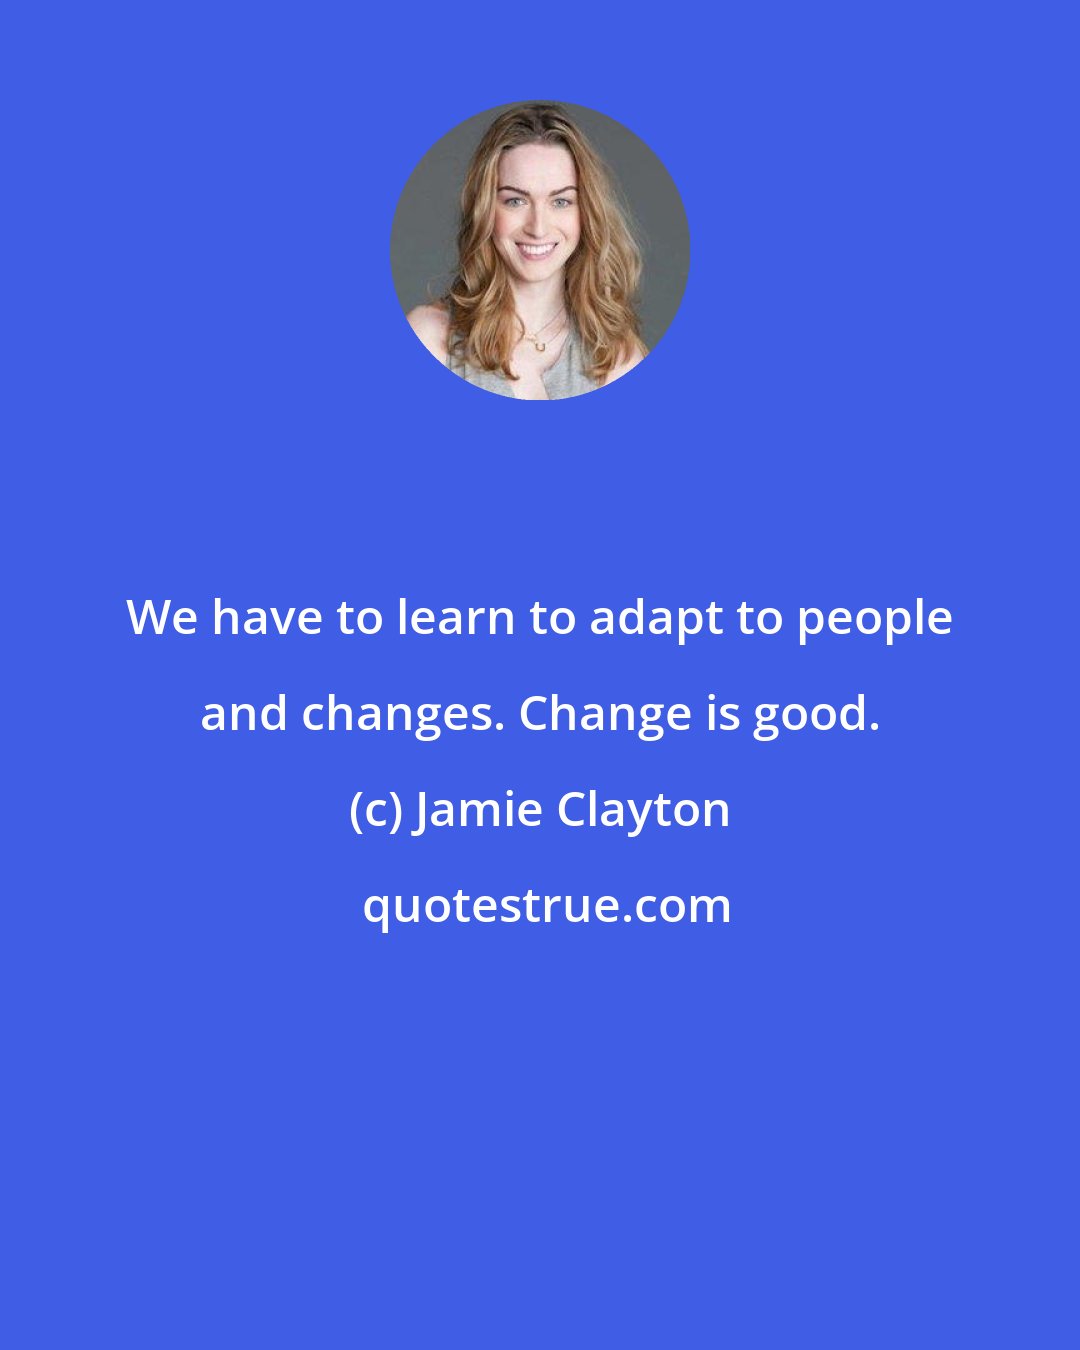 Jamie Clayton: We have to learn to adapt to people and changes. Change is good.